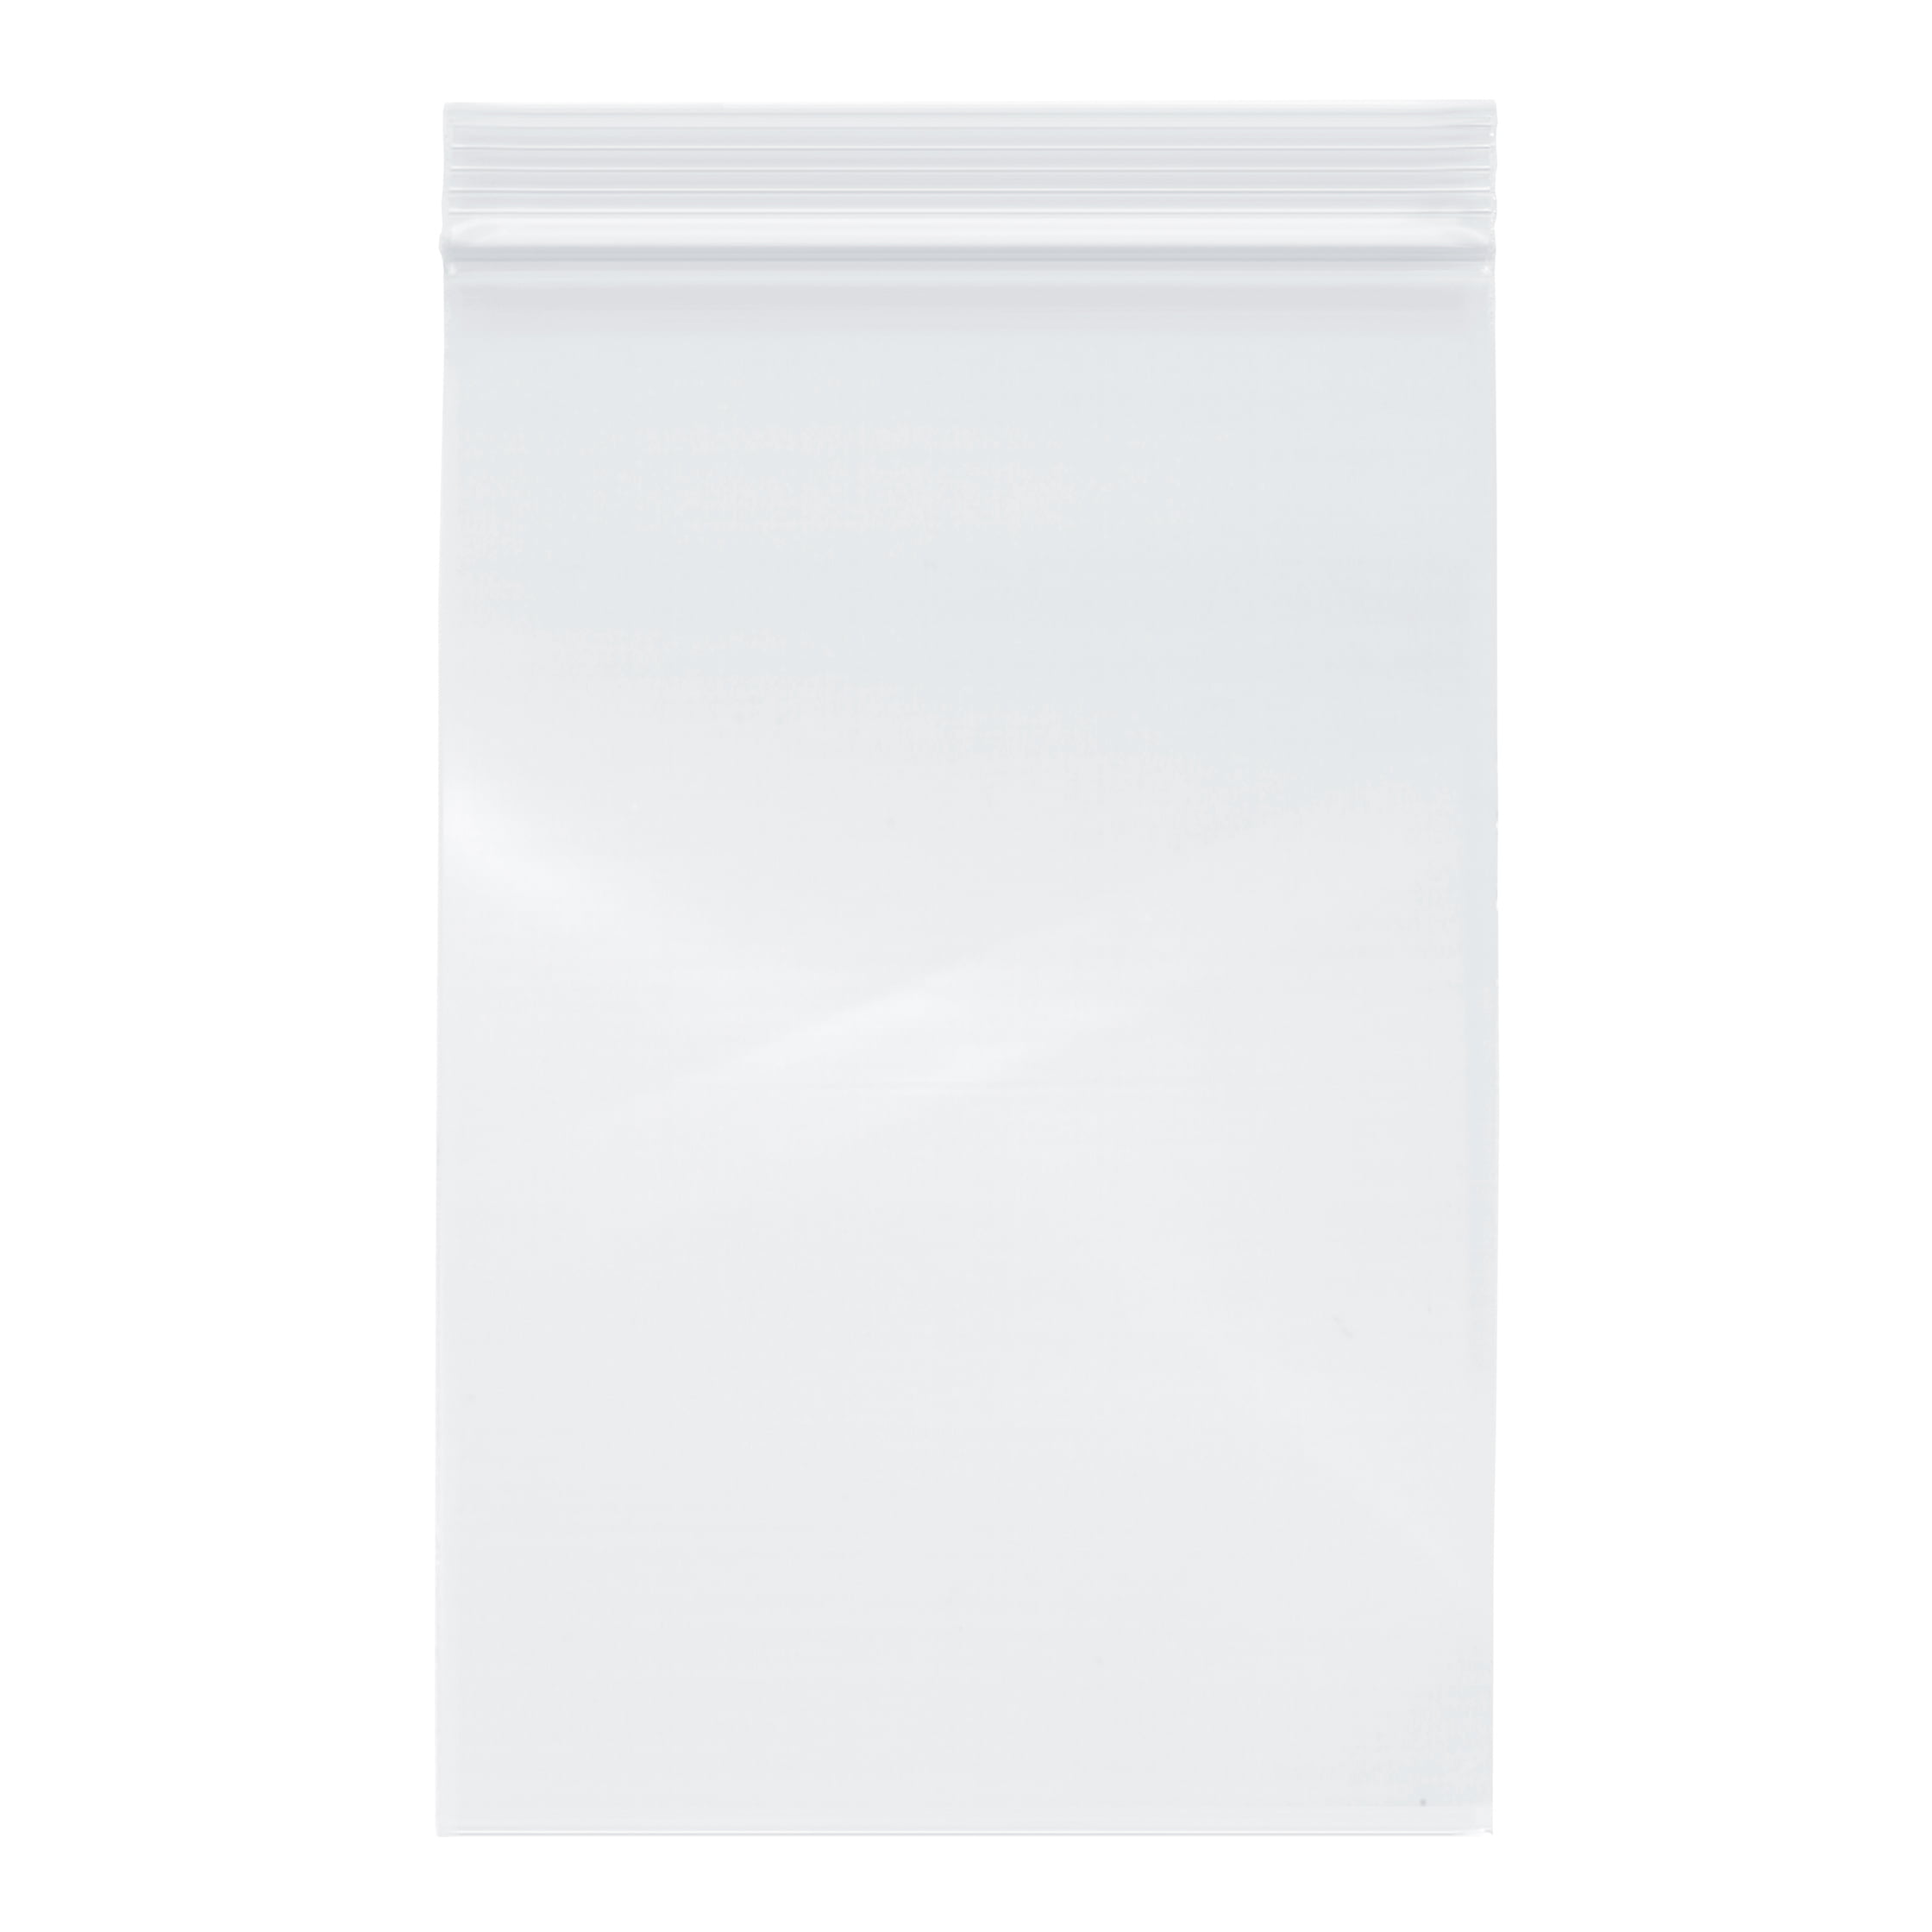 Storage Bag 1000 1.5 mil 4x5 Owlpack Clear Poly Open End Plastic Product 